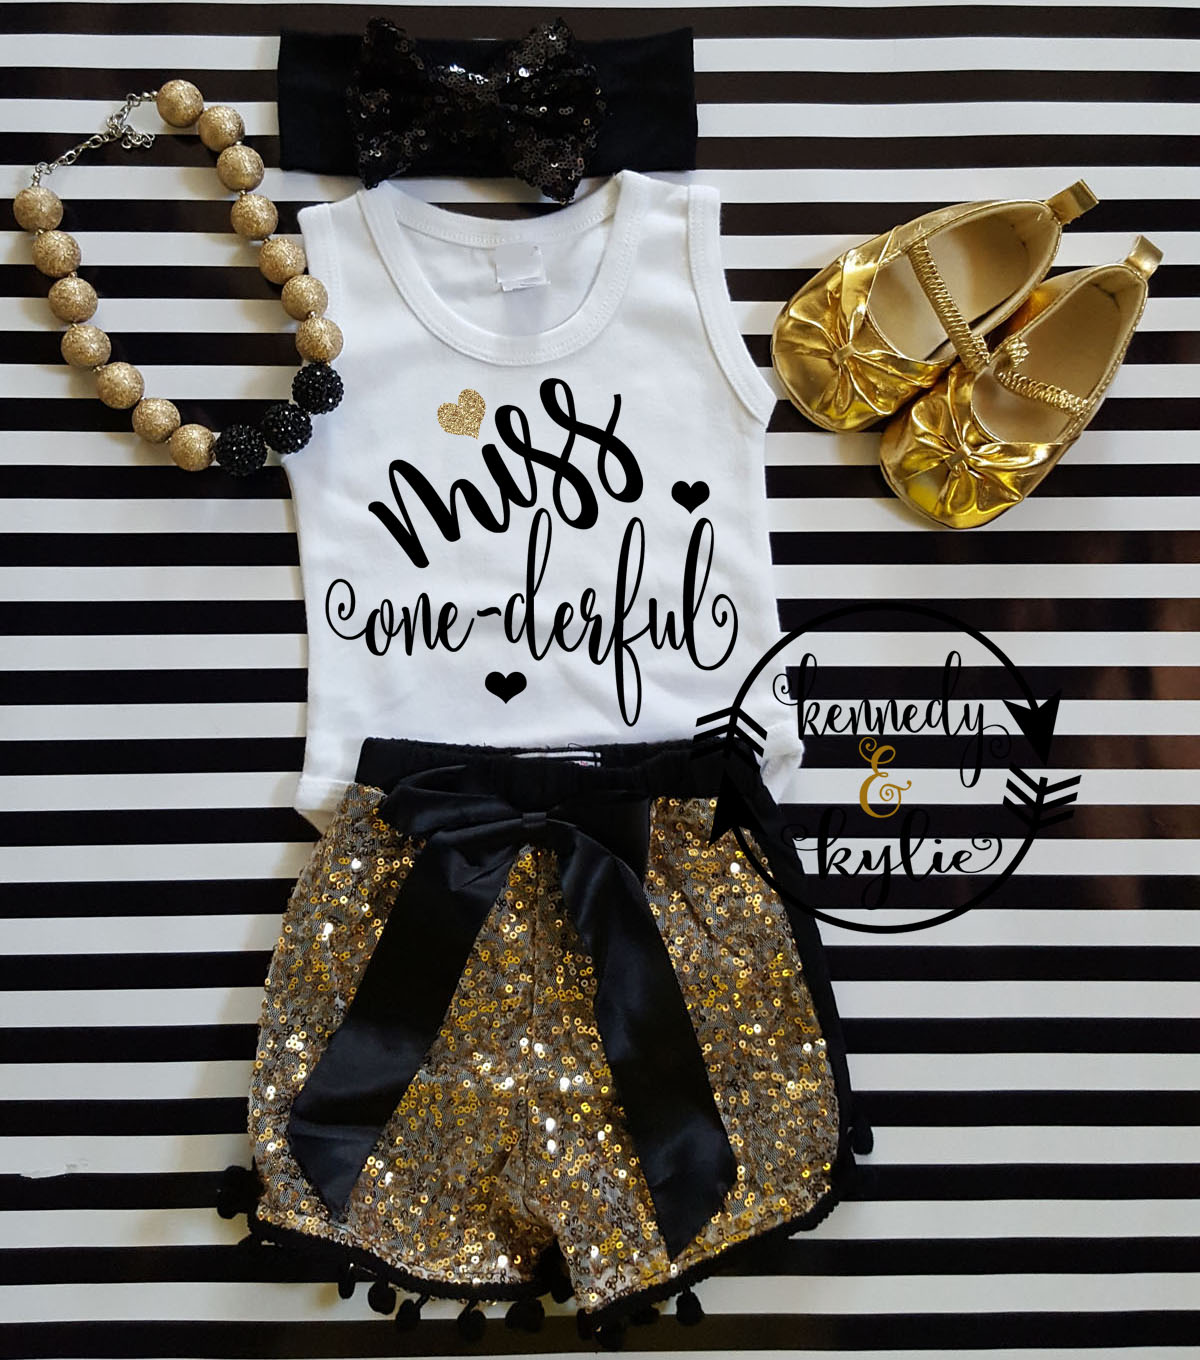 Black and Gold Miss One-derful With Gold Sequin Pom Pom Shorts